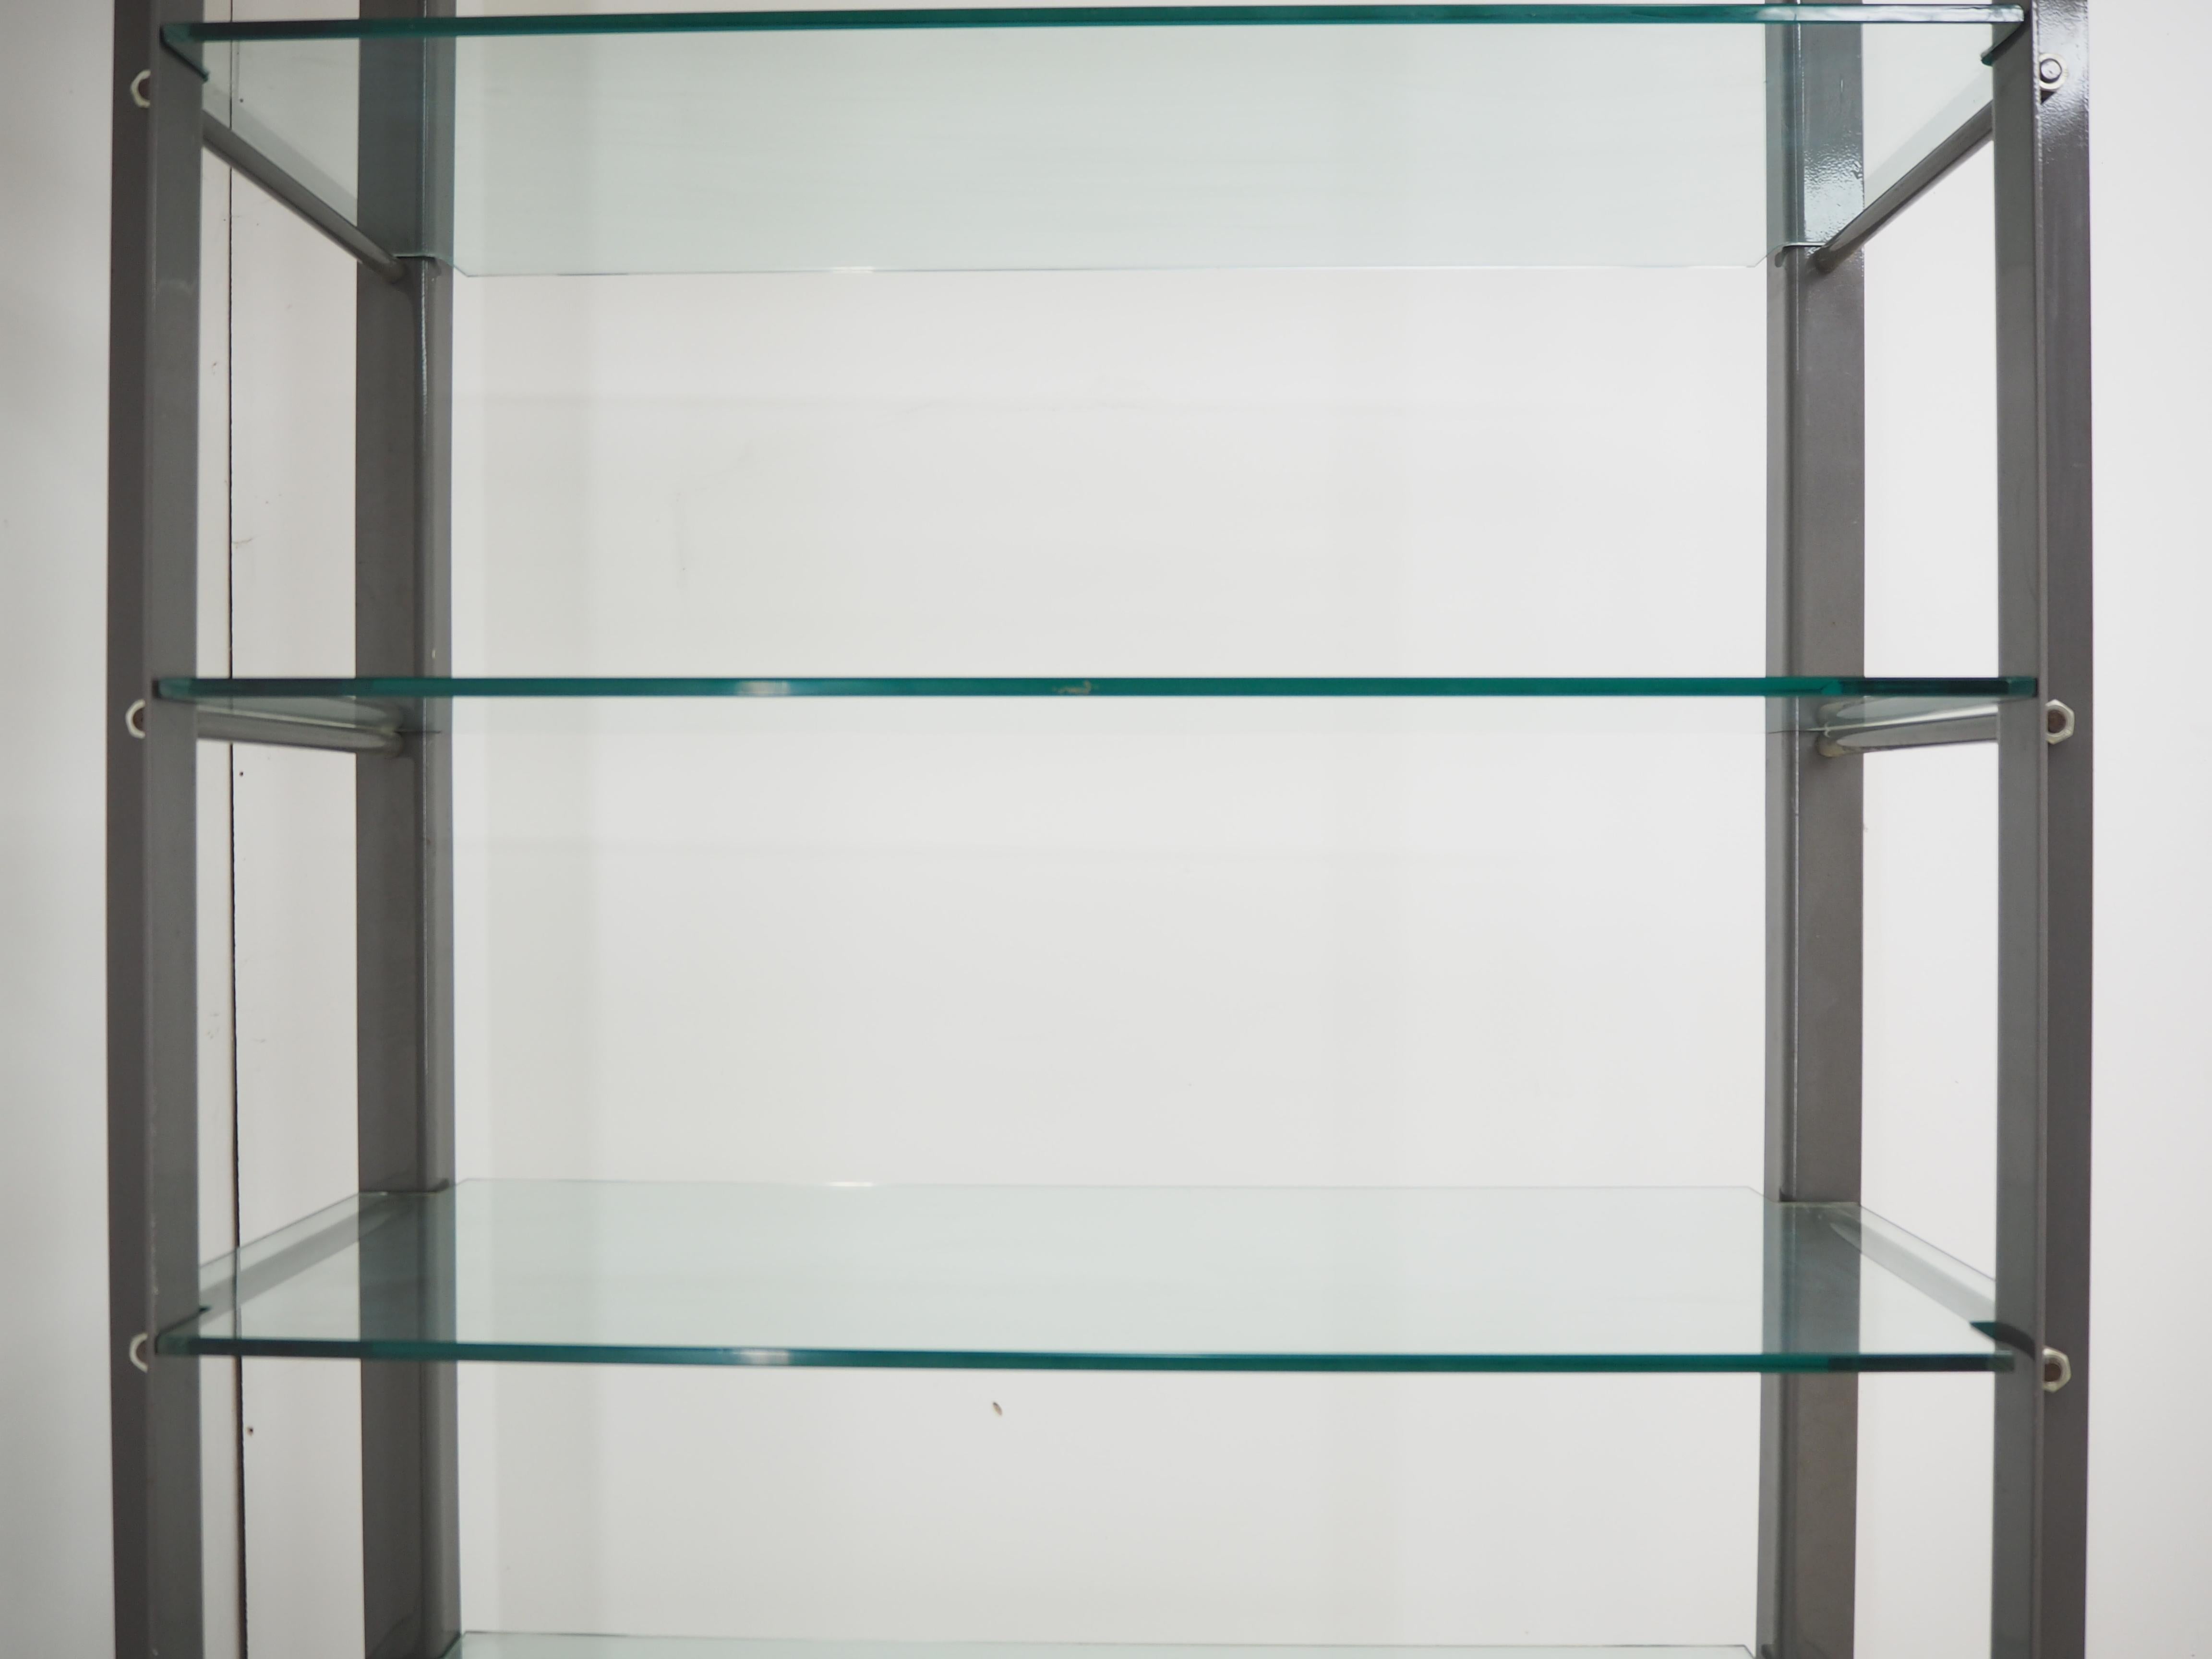 Industrial Shelves, Steel and Tempered Glass, 2000s In Good Condition For Sale In Praha, CZ